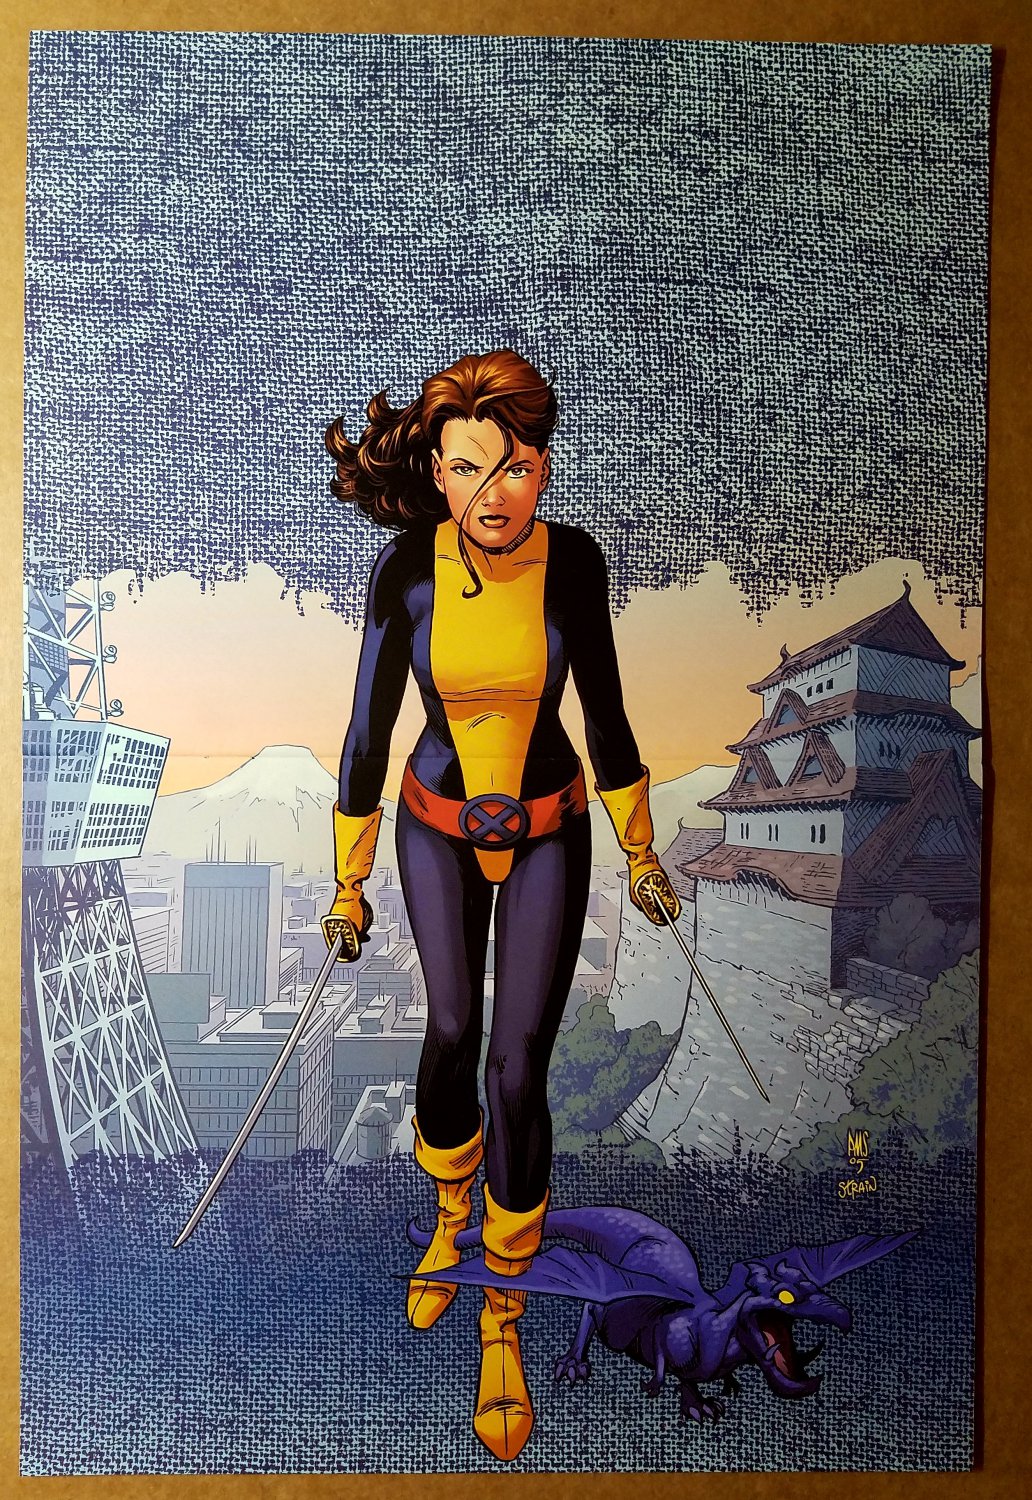 X Men Kitty Pryde Lockheed Marvel Comics Poster By Paul Smith